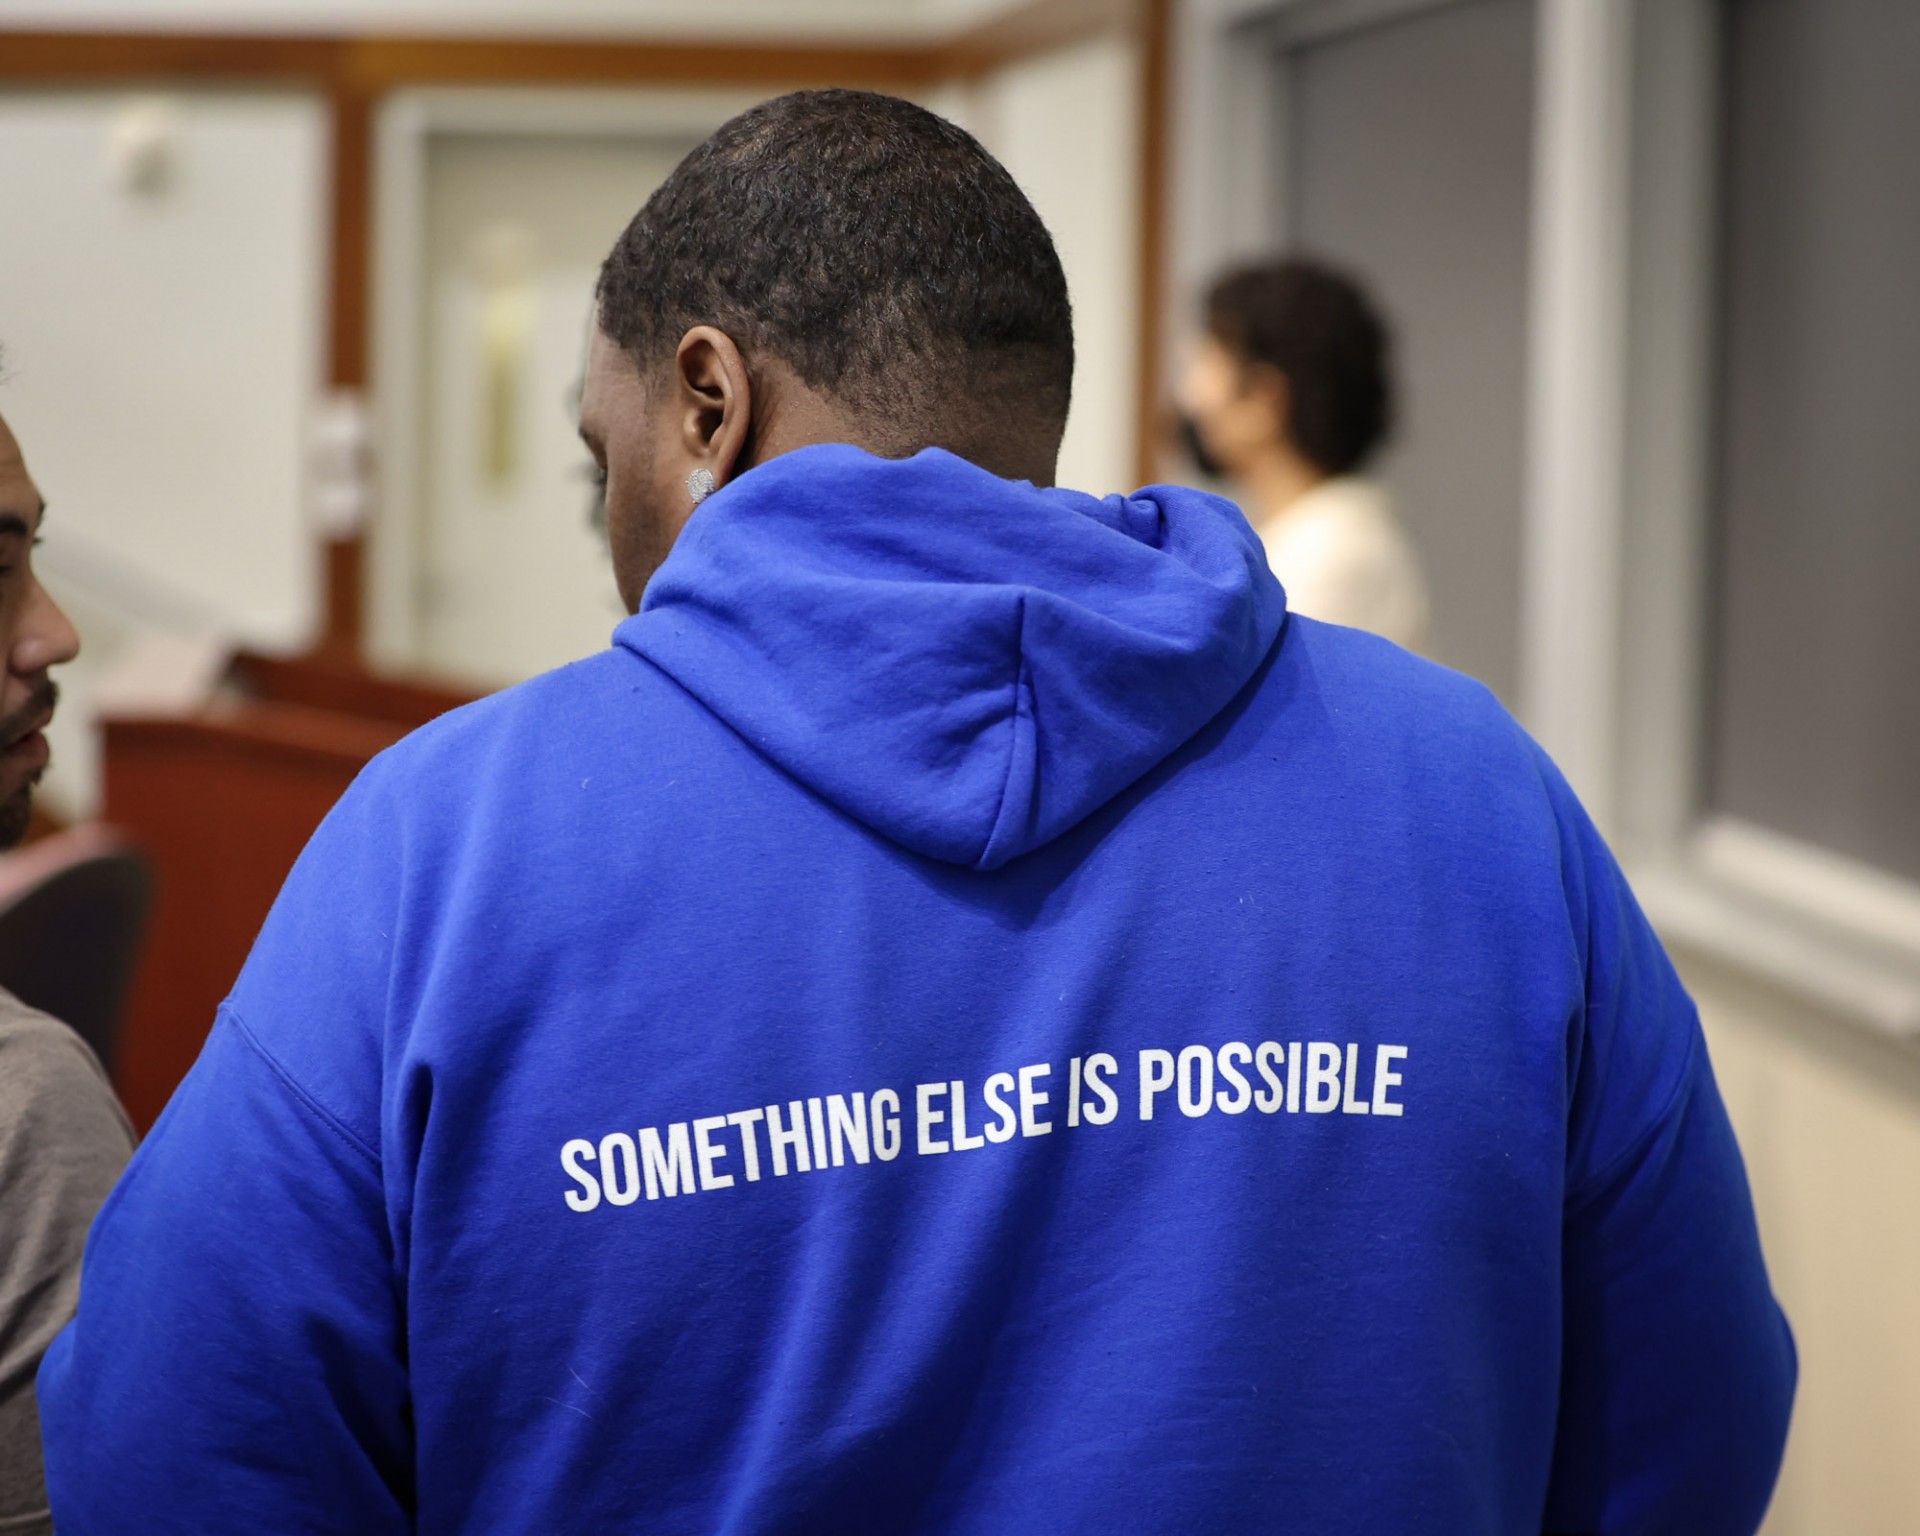 The back of a blue sweatshirt that says "something else is possible"